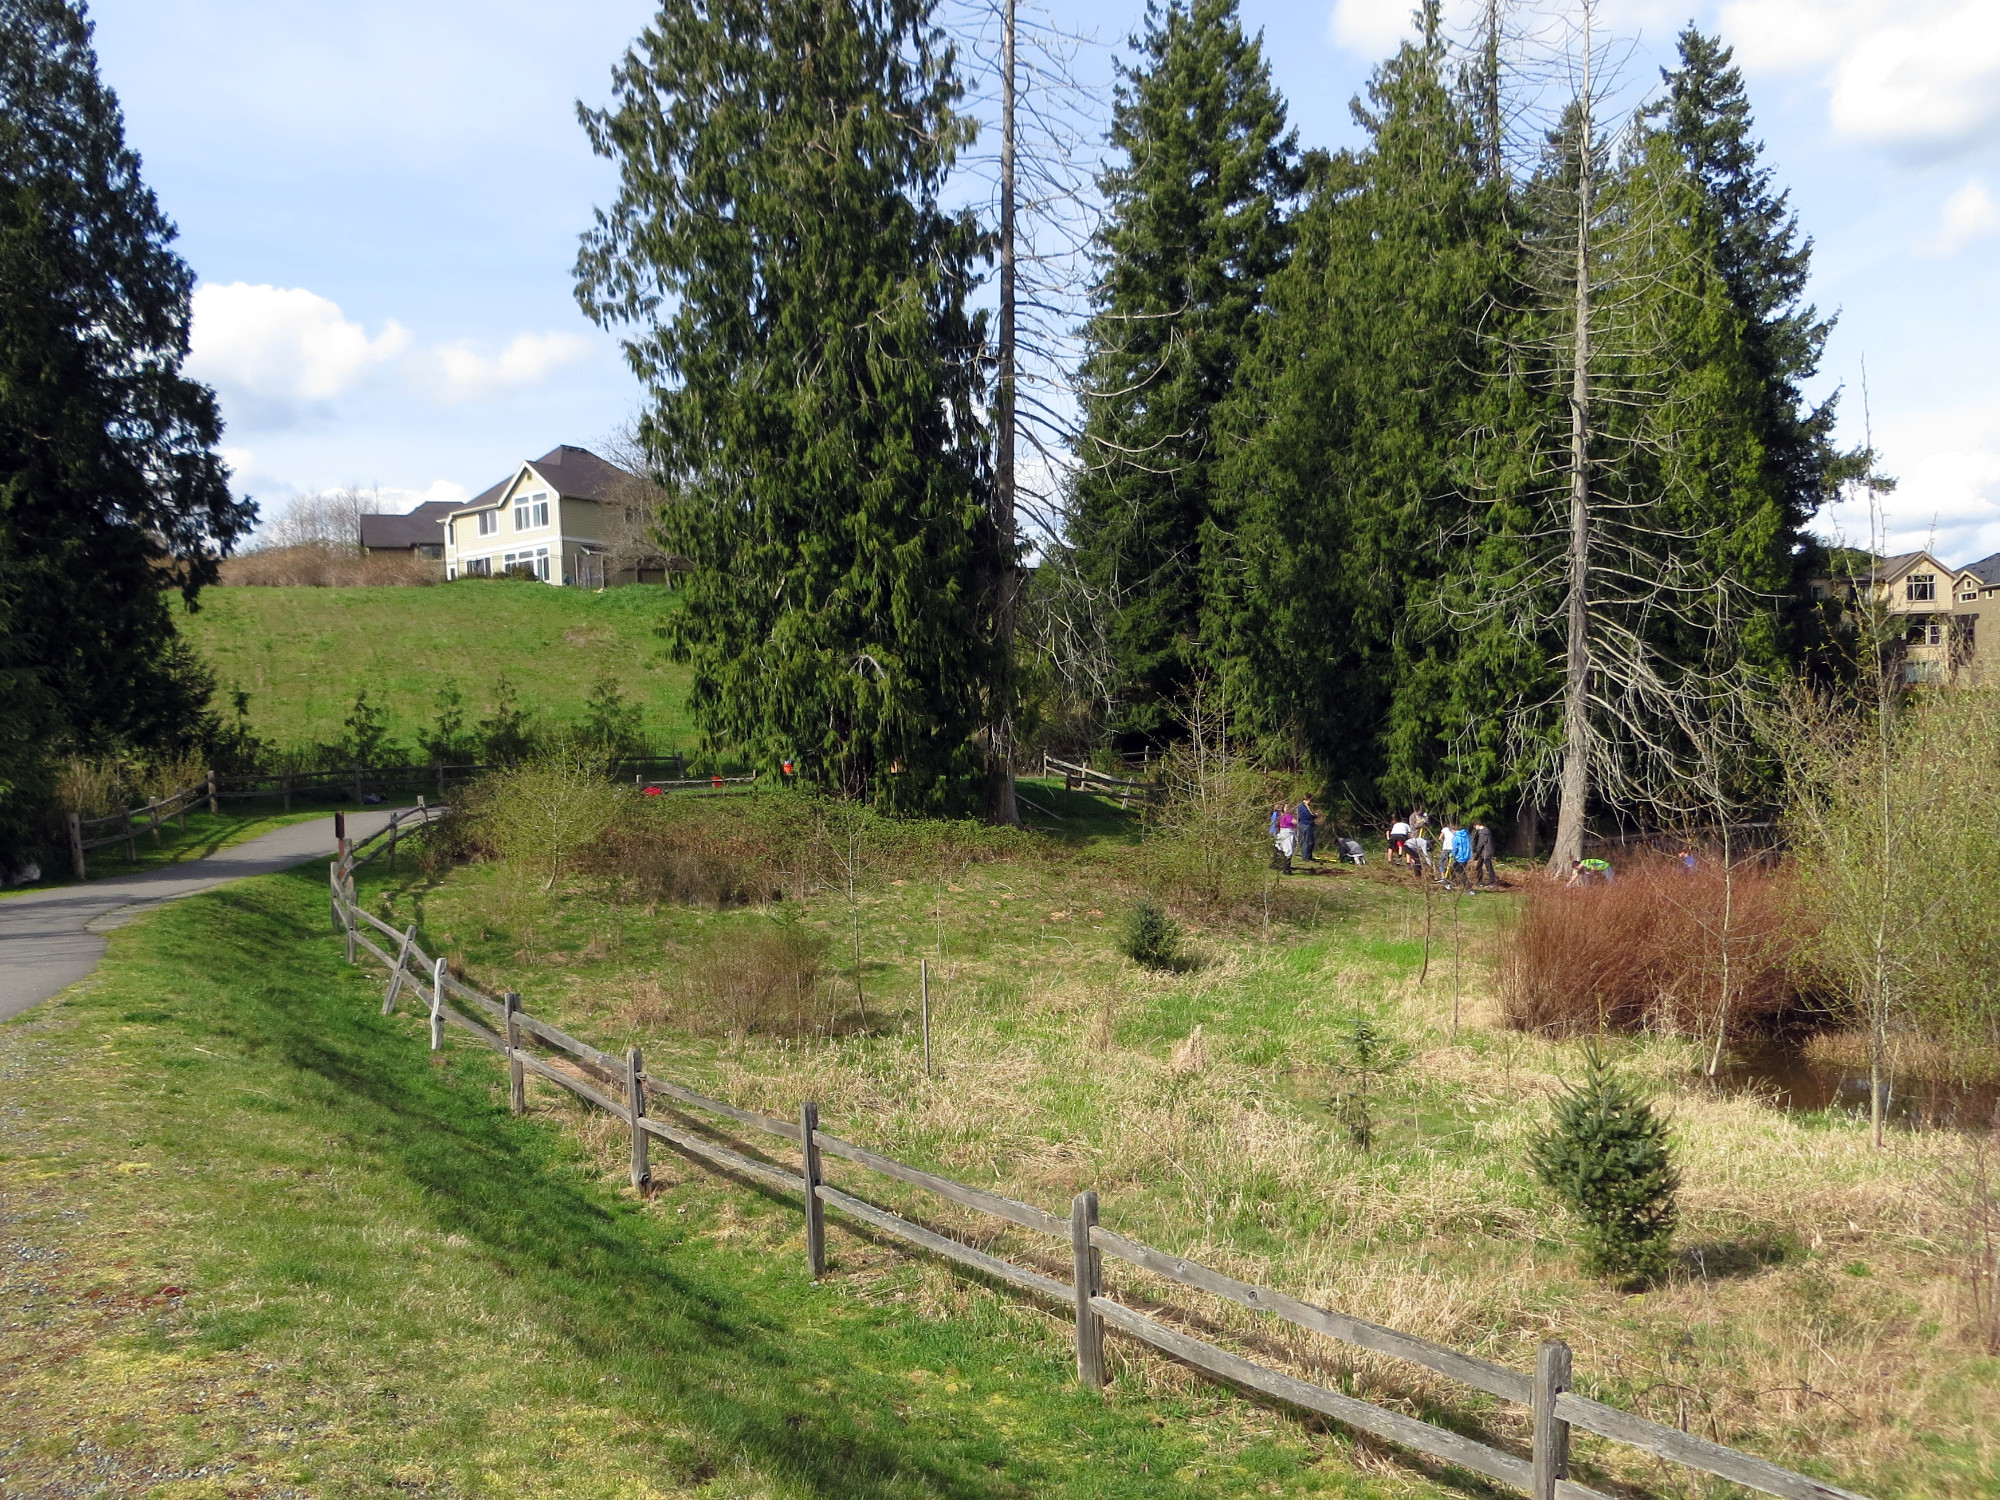 A restoration work party works in the planted area beside the Illahee Park Trail. A wooden fence encloses the restoration area filled with small coniferous trees and other vegetation.